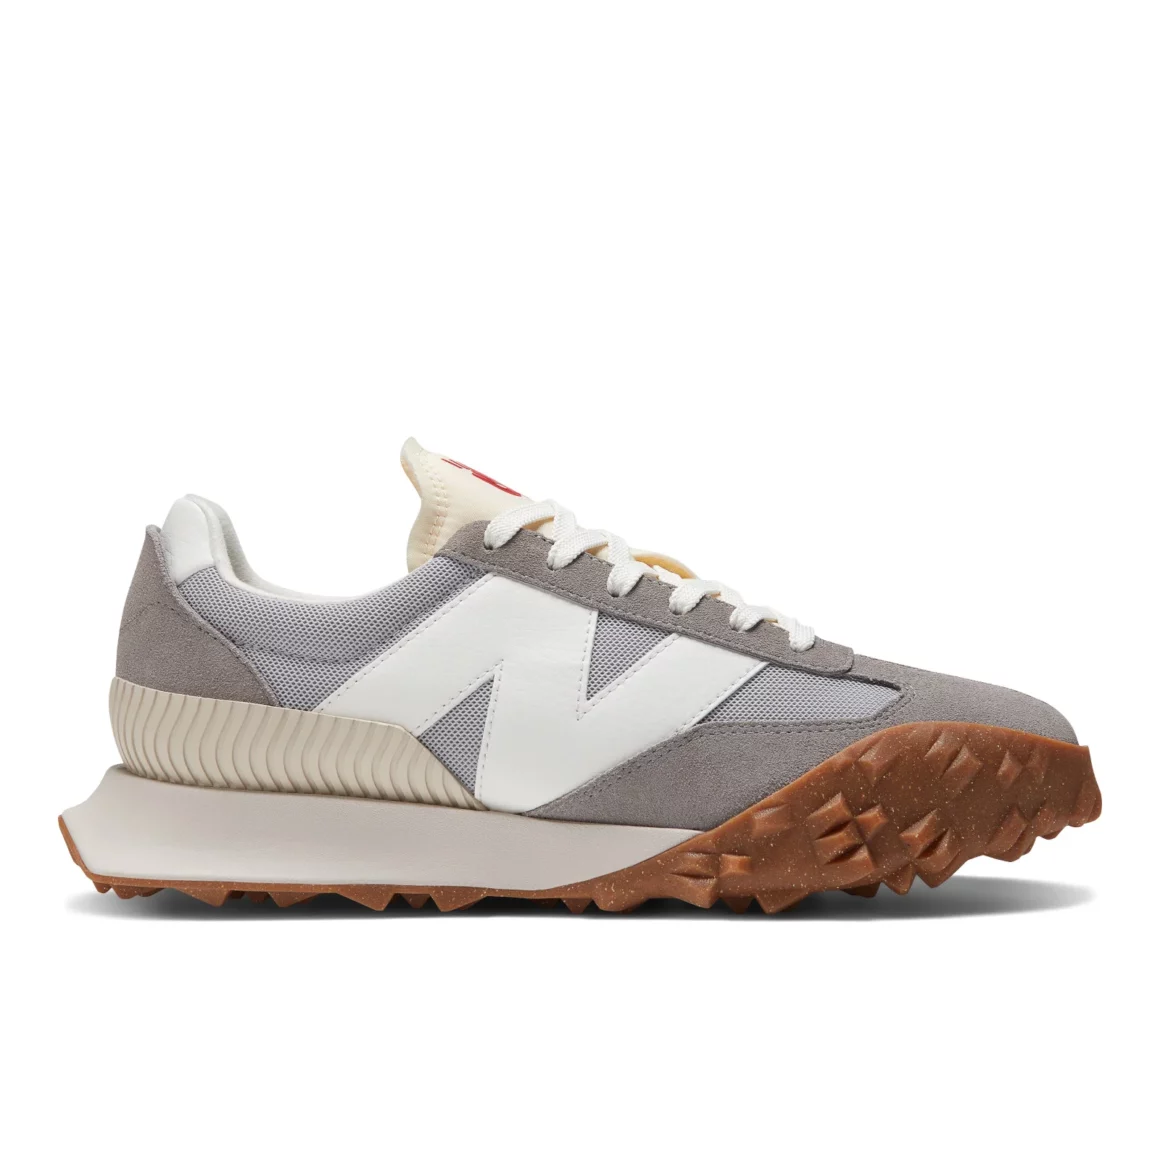 Sneakers homme à porter hiver New Balance XC72